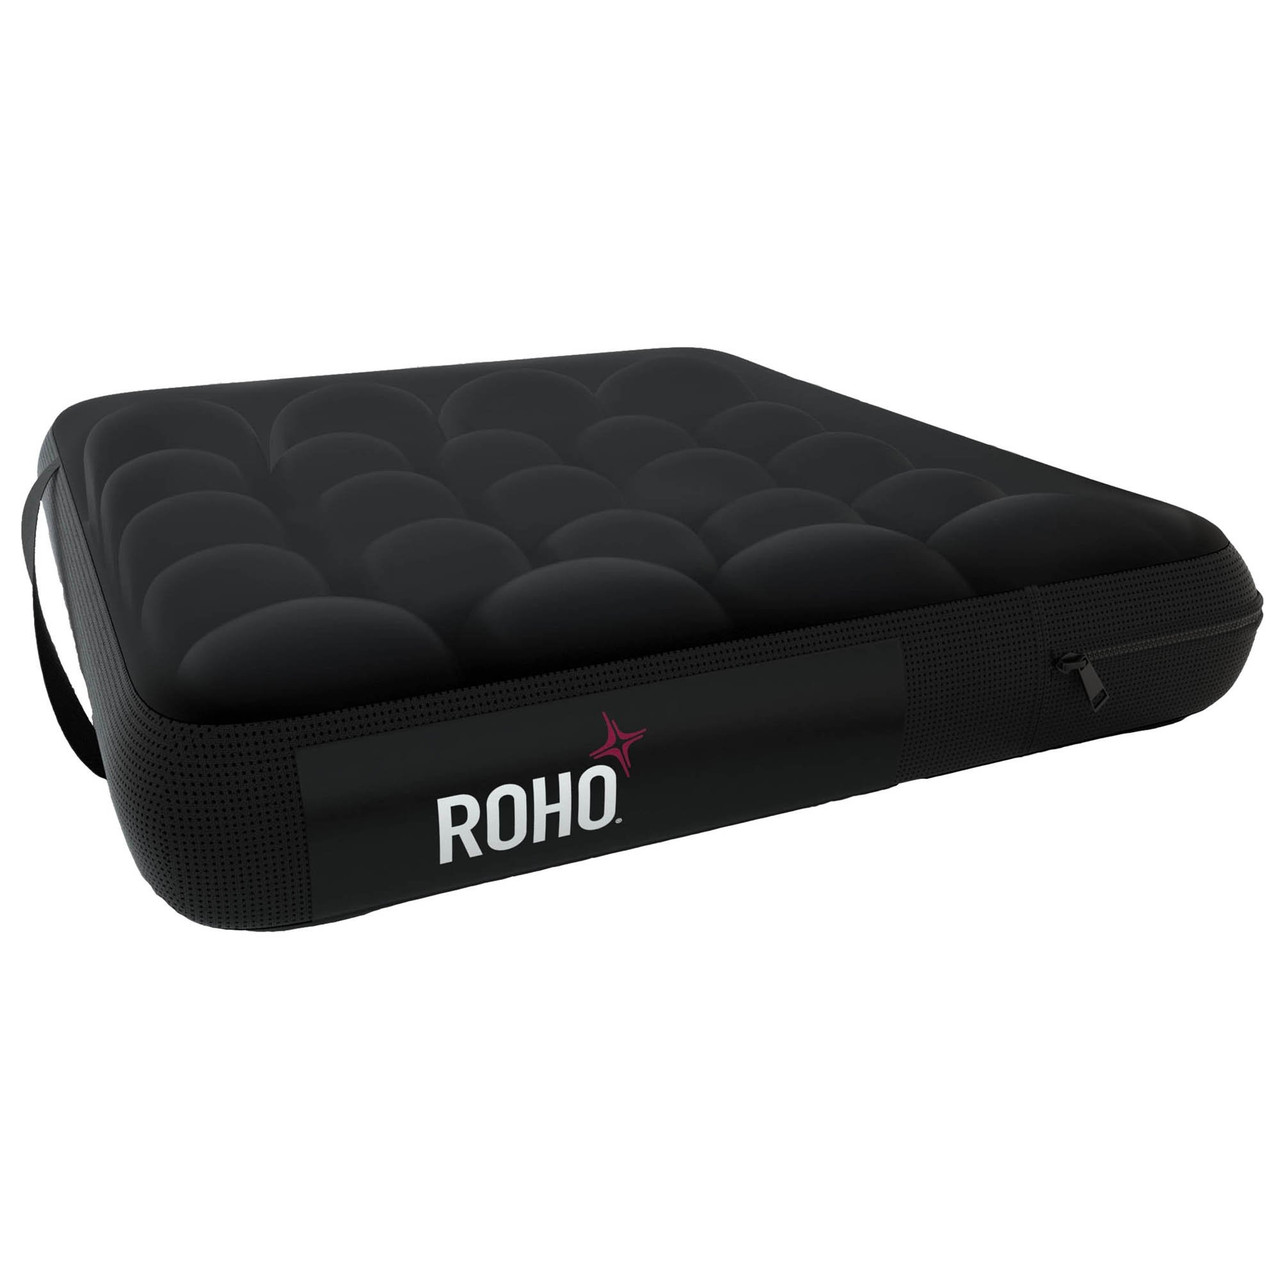 ROHO Mosaic Inflatable Seat Cushion - Air Cells, Great for Wheelchairs,  Black